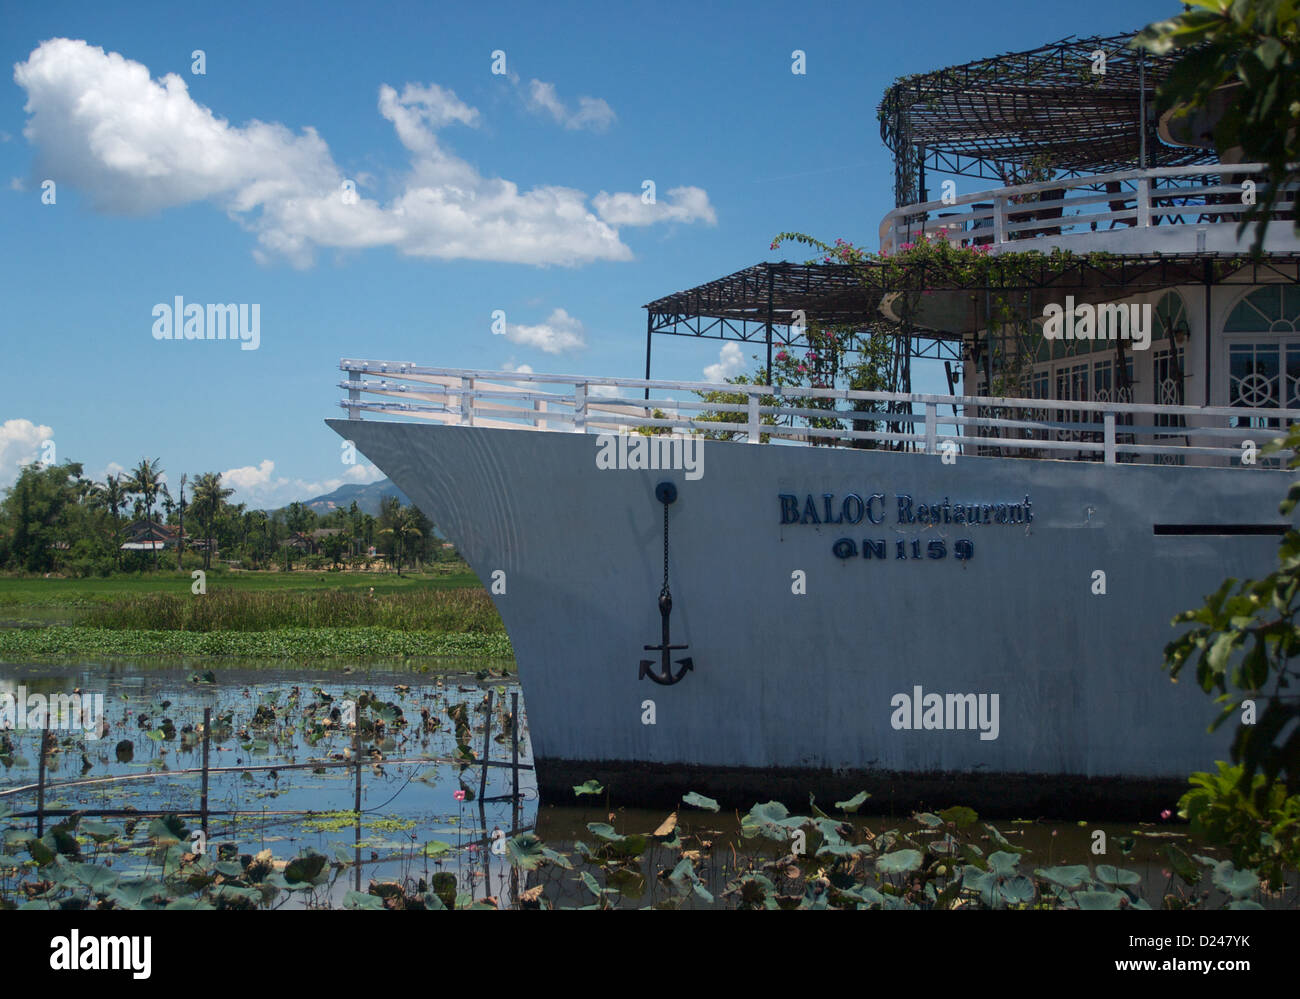 The unusual sight of a restaurant boat moored in a rice field, Hoi An Vietnam Stock Photo